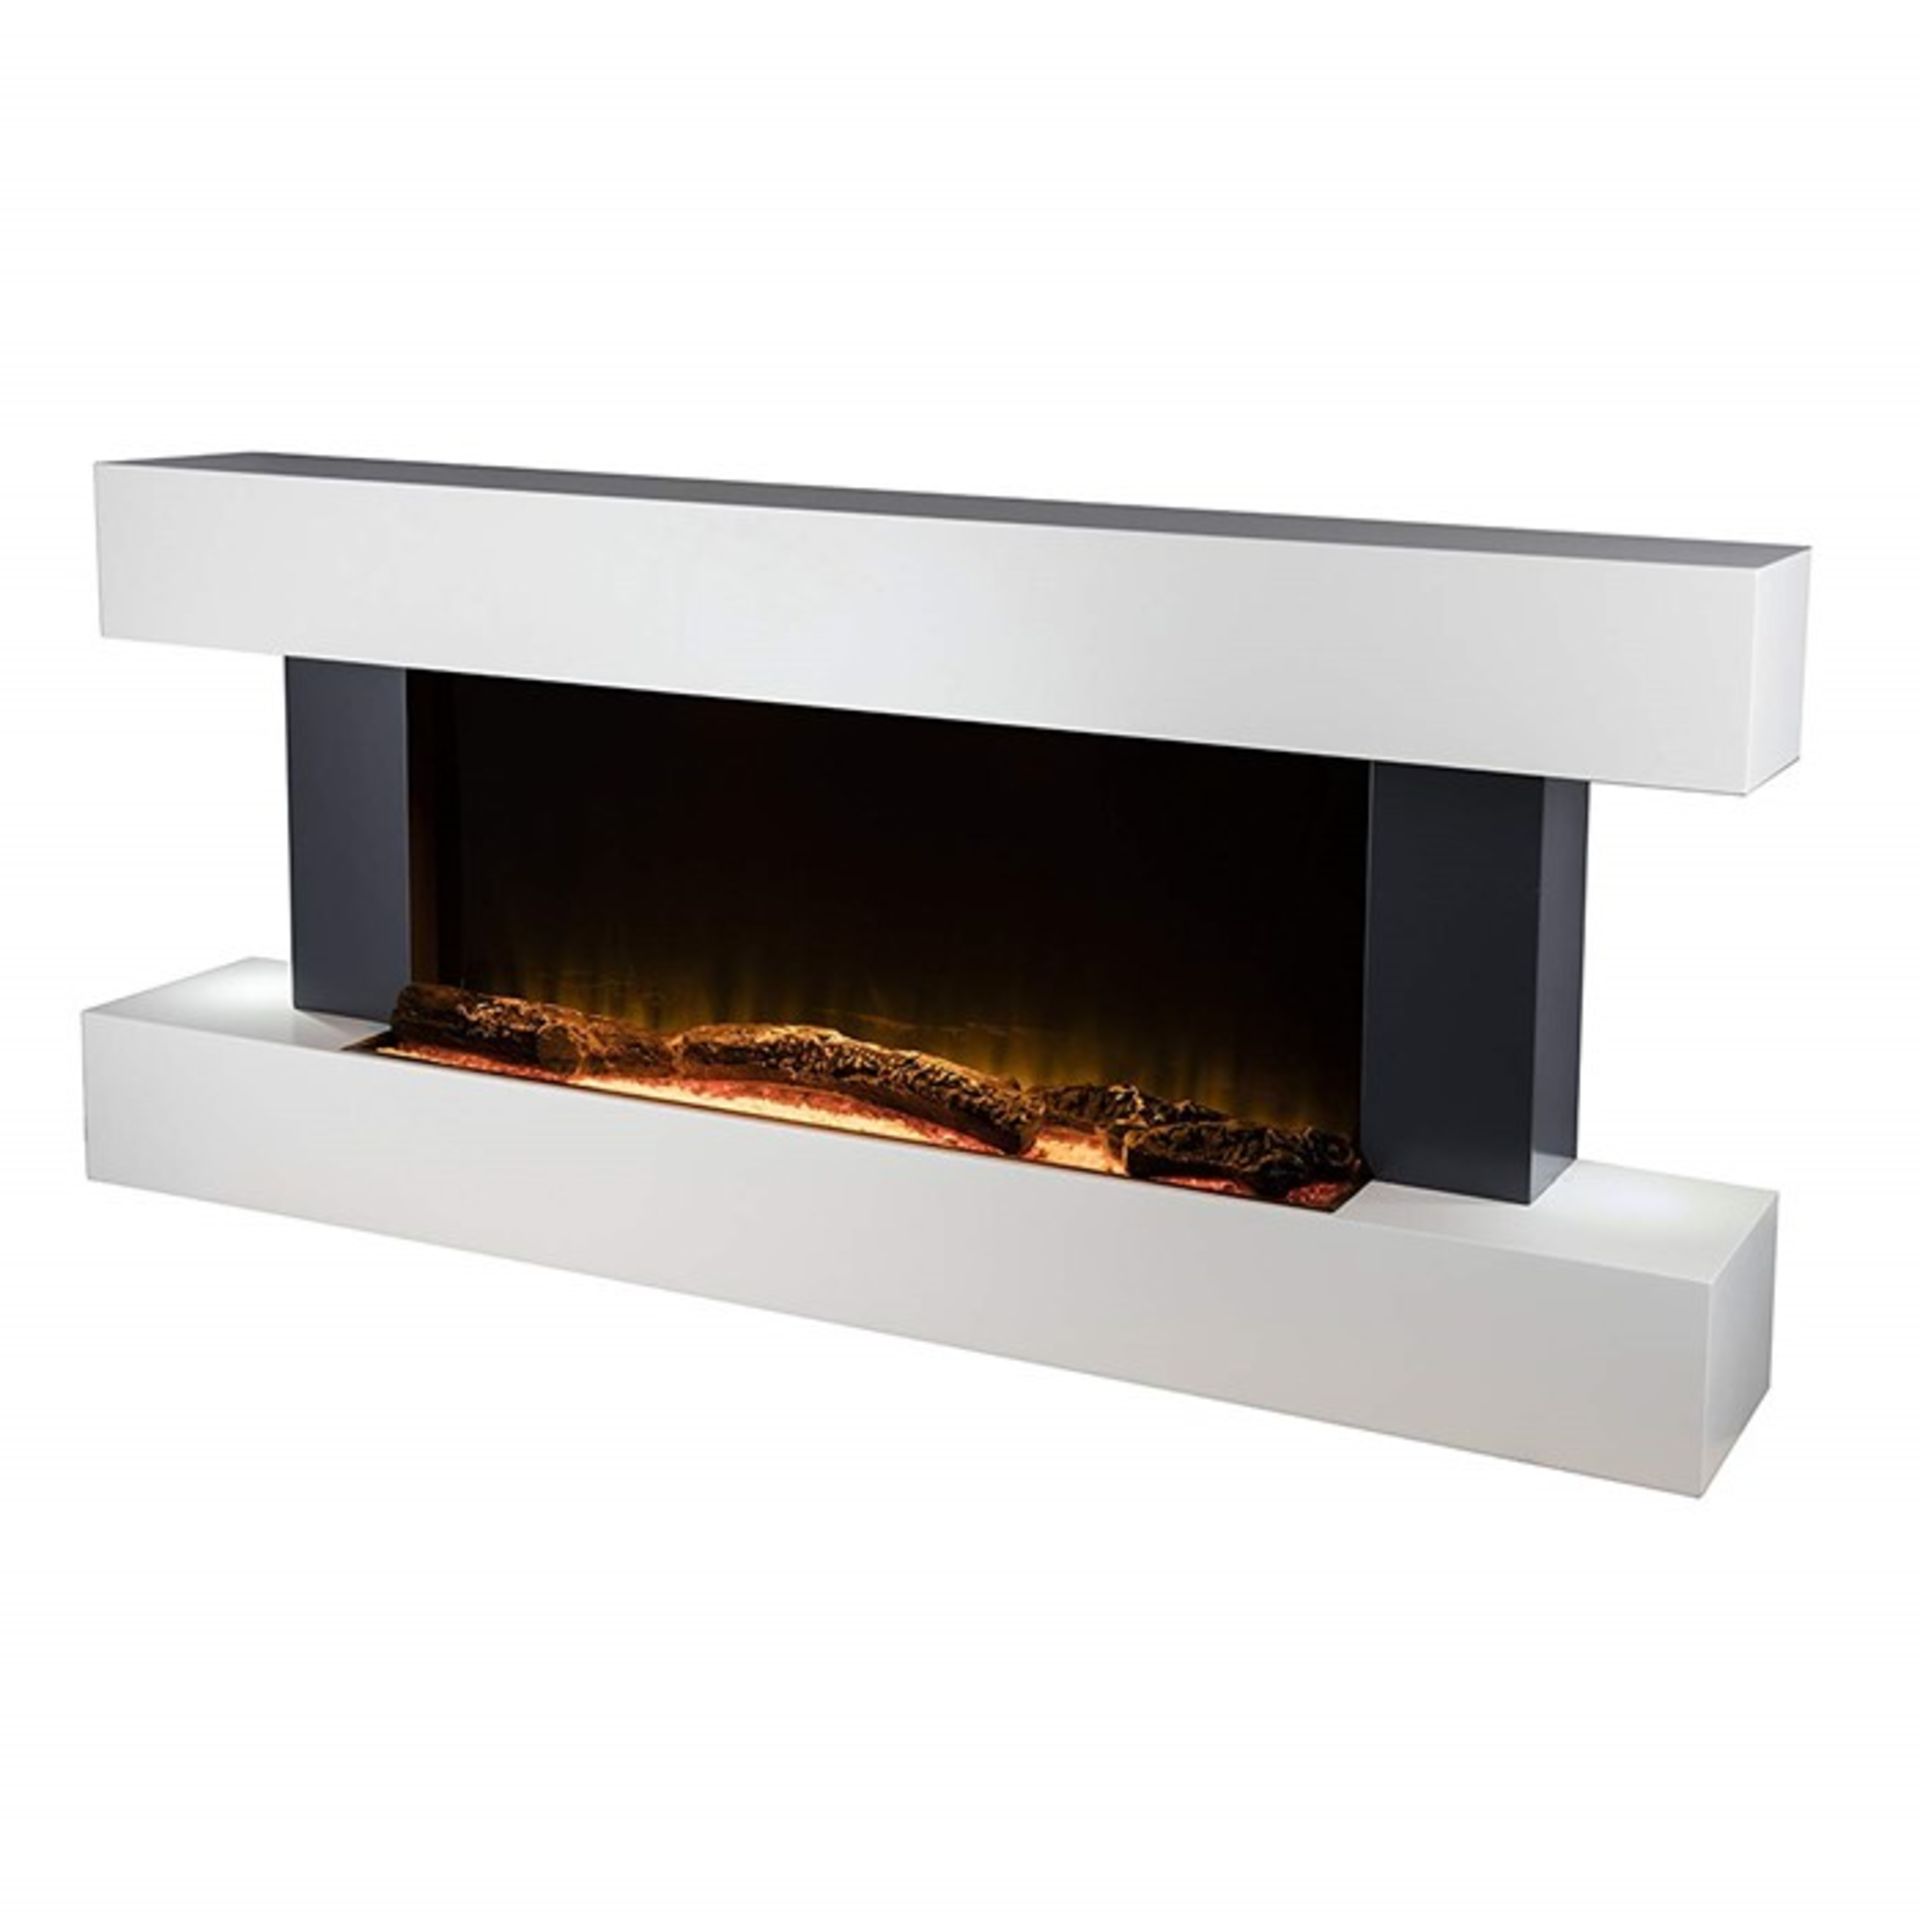 2000w Wall Mounted surround electric fire place suite with LED flame effect, new and boxed, features - Image 4 of 6